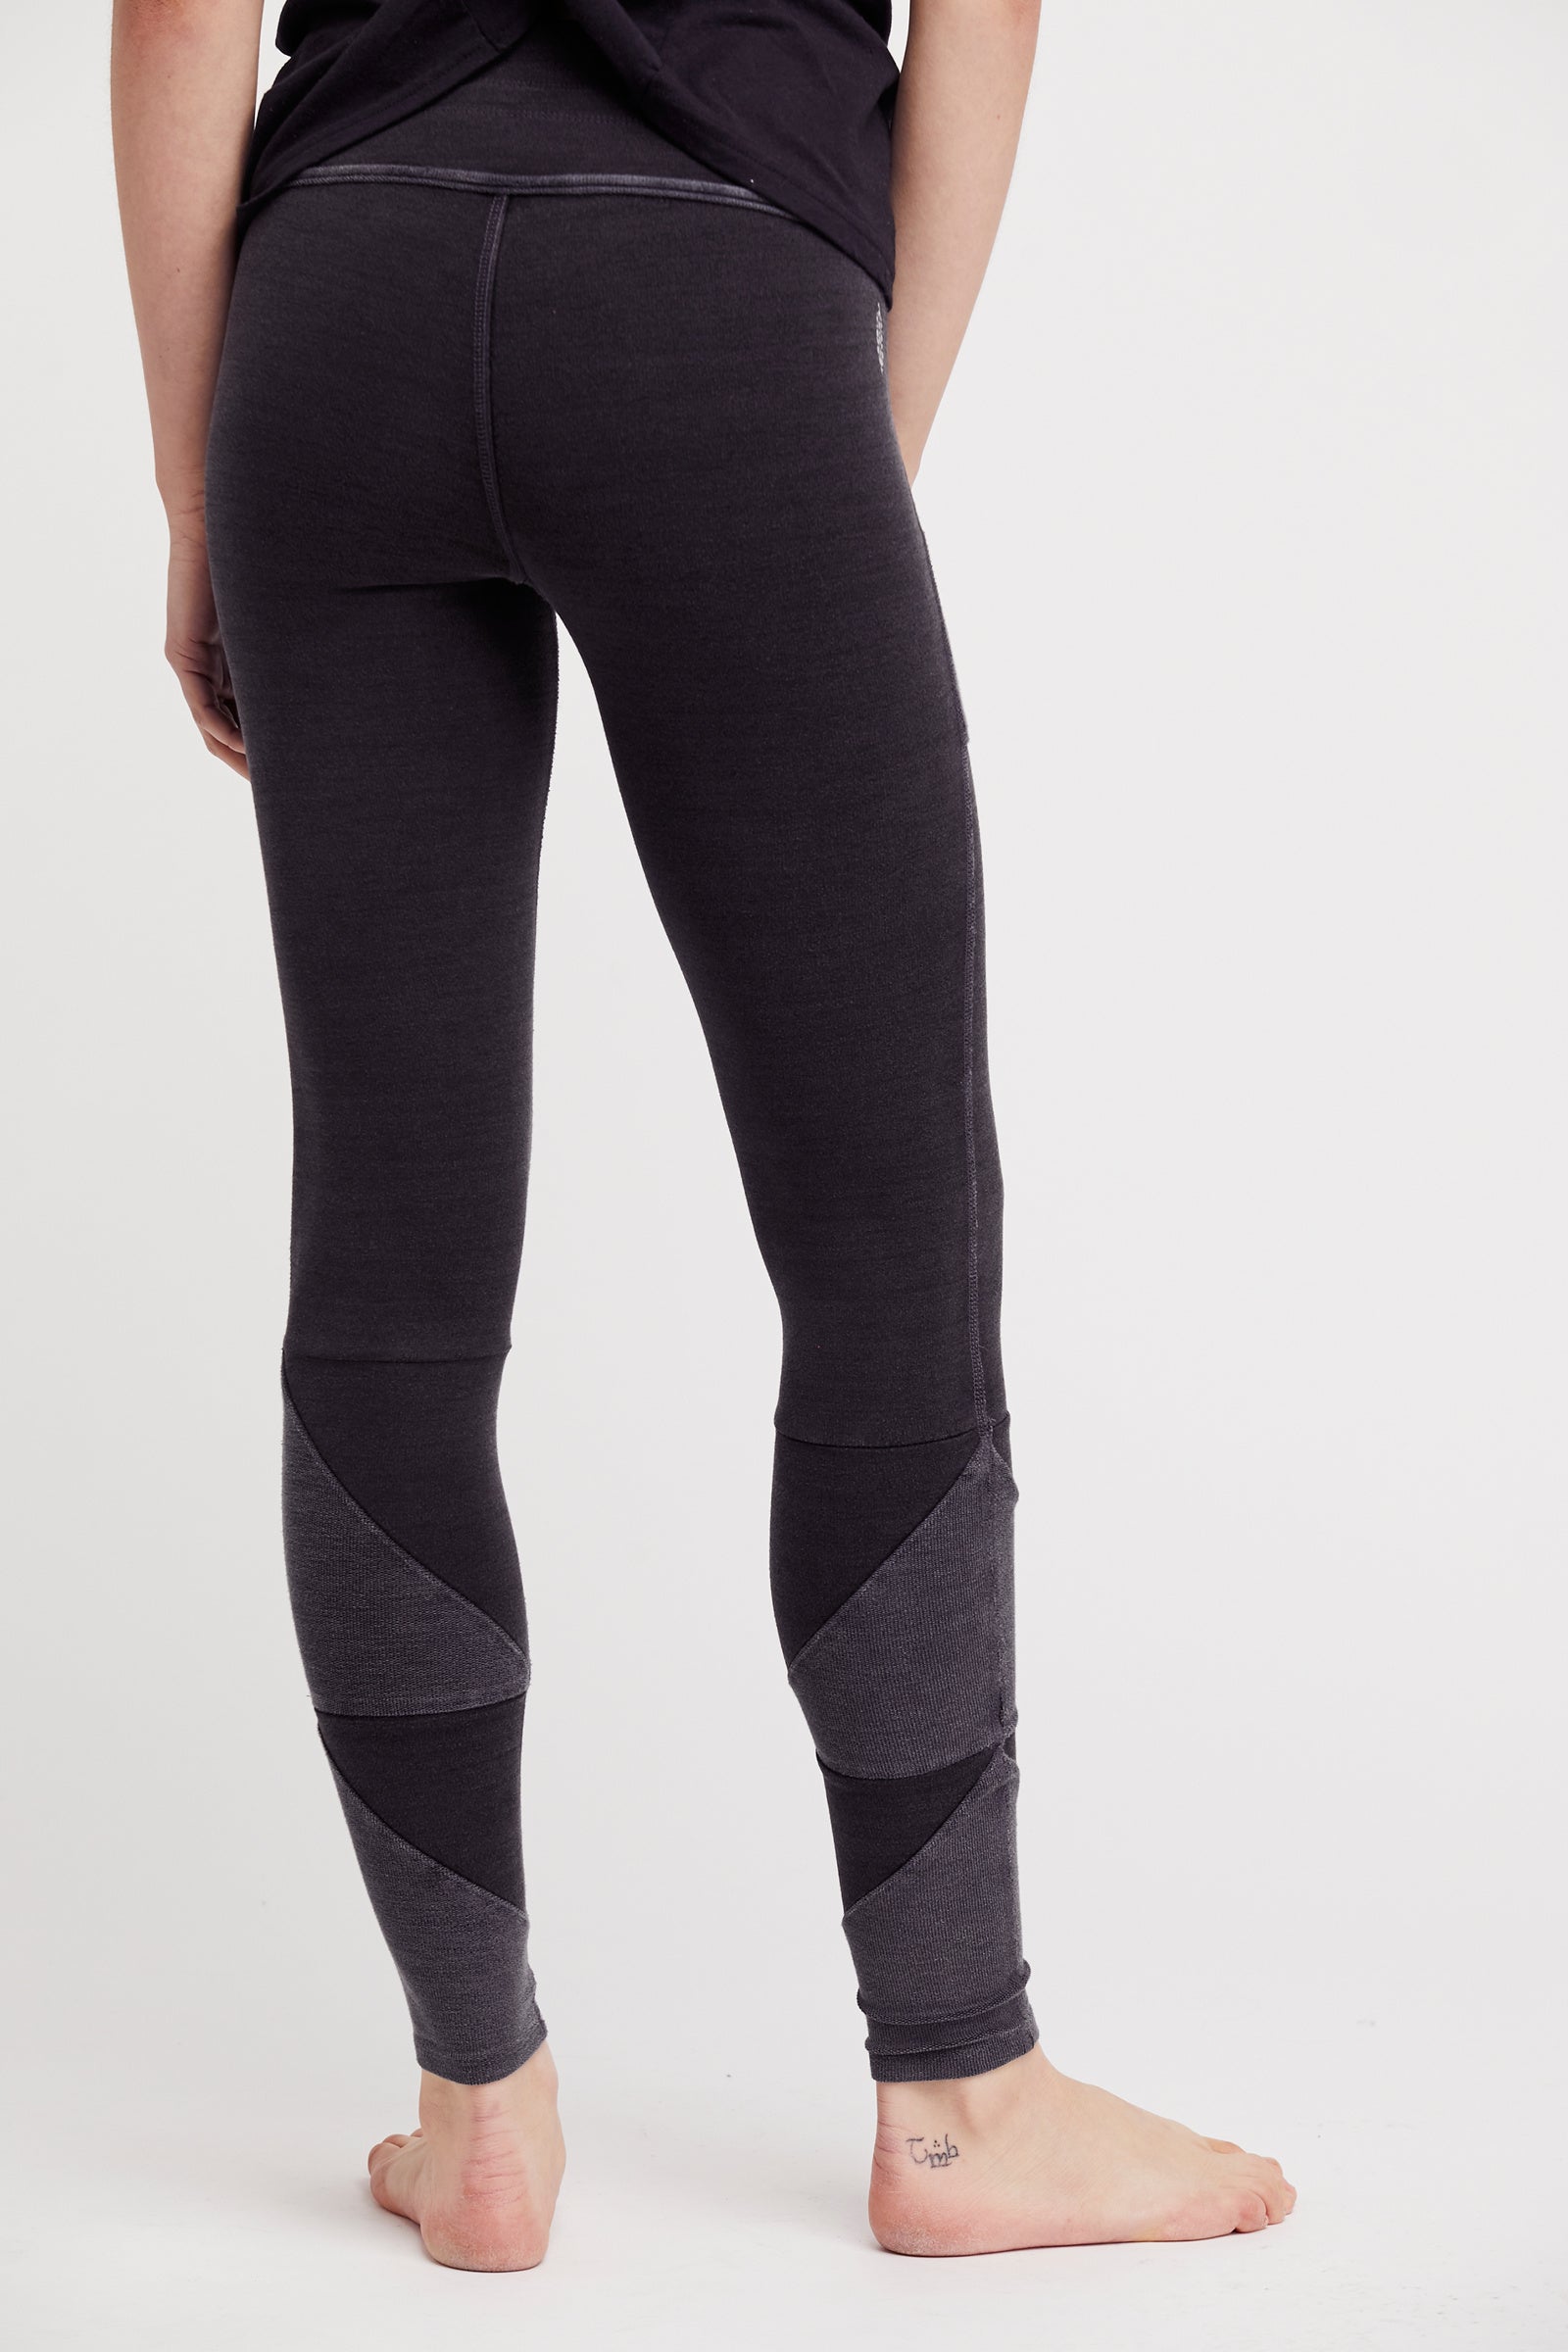 NEW Free People Kyoto High Waist Leggings - Mocha Taupe - Extra Small